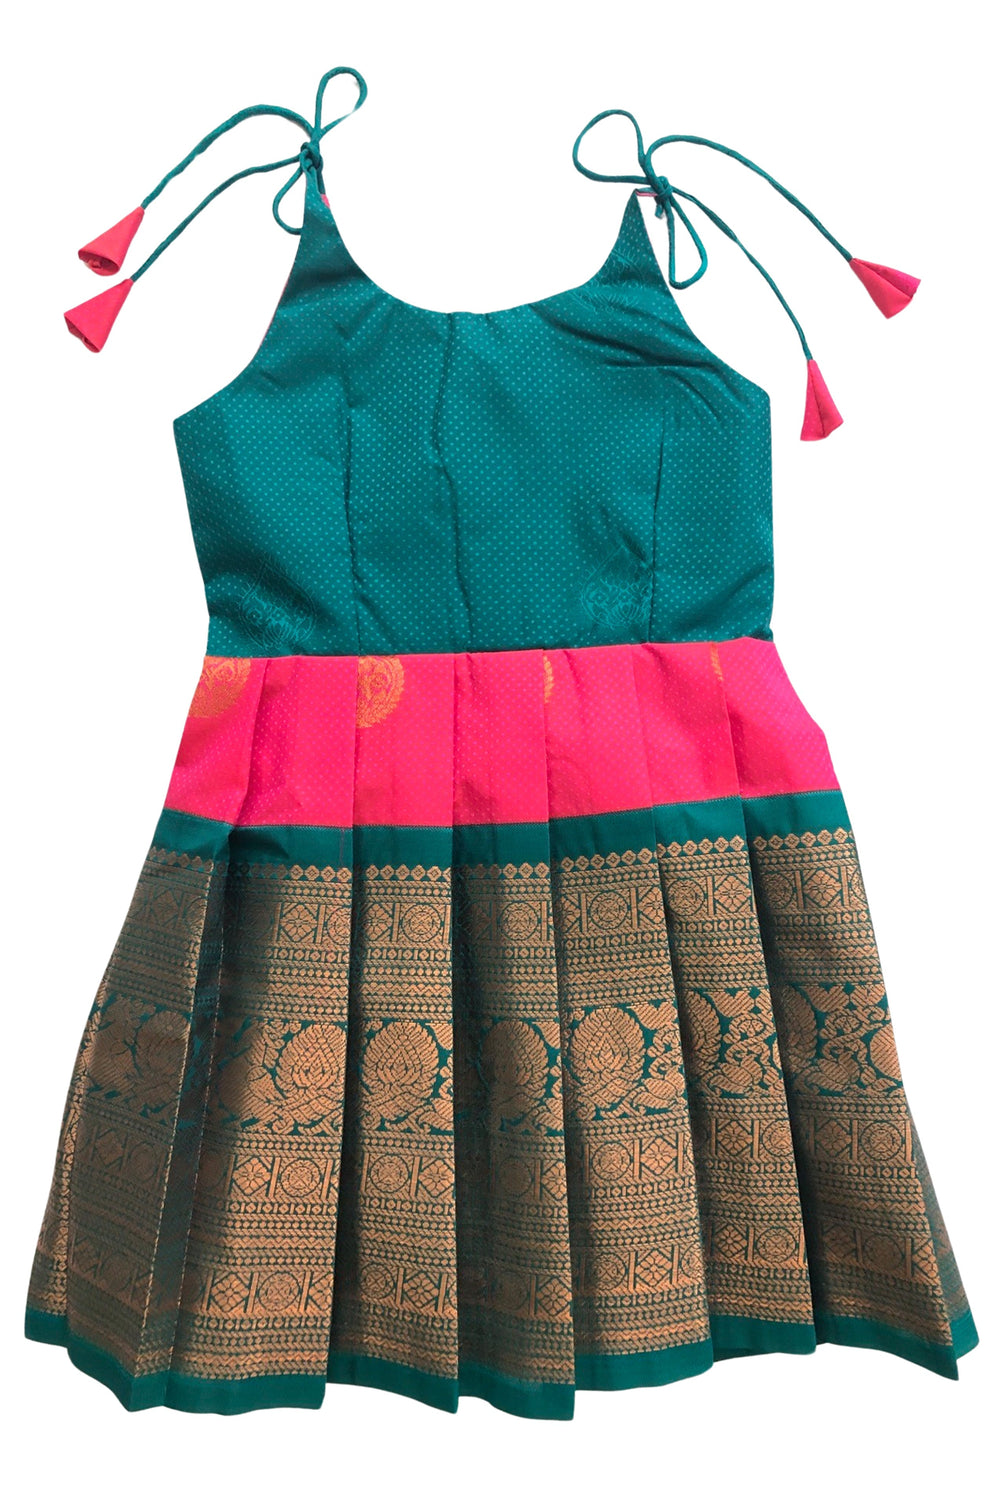 The Nesavu Tie Up Frock Traditional Teal and Pink Silk Tie-Up Frock with Classic Print – Ethnic Elegance Nesavu 18 (2Y) / Pink / Style 2 T315B-18 Teal & Pink Ethnic Silk Frock | Traditional Printed Tie-Up Dress | The Nesavu